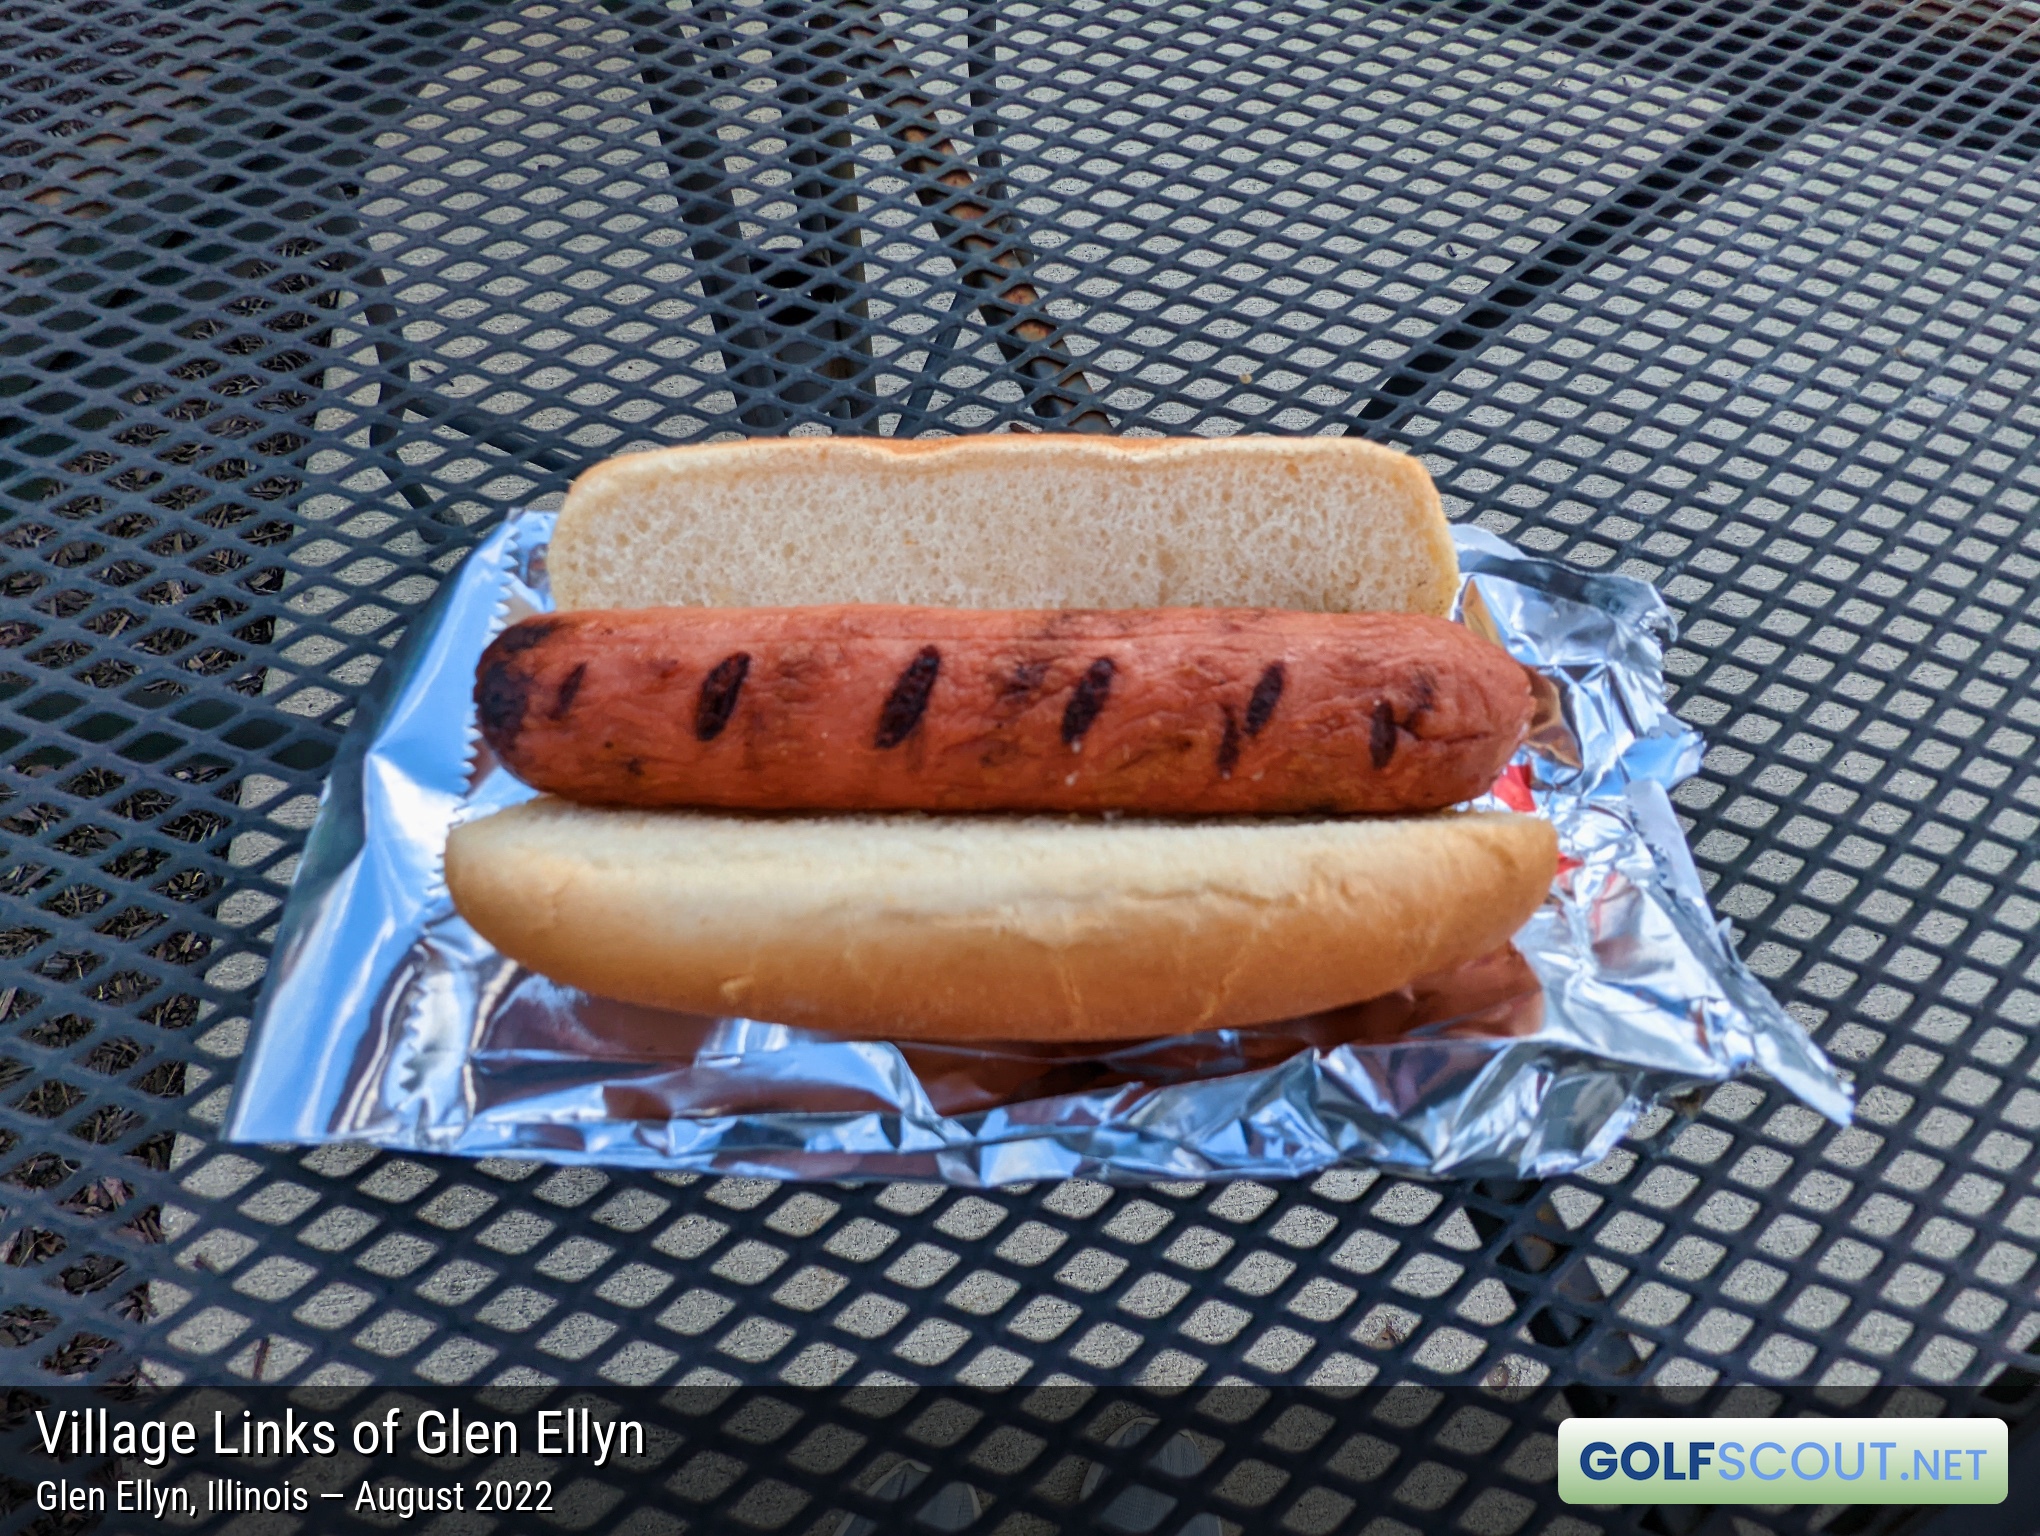 Photo of the food and dining at Village Links of Glen Ellyn in Glen Ellyn, Illinois. Photo of the hot dog at Village Links of Glen Ellyn in Glen Ellyn, Illinois.